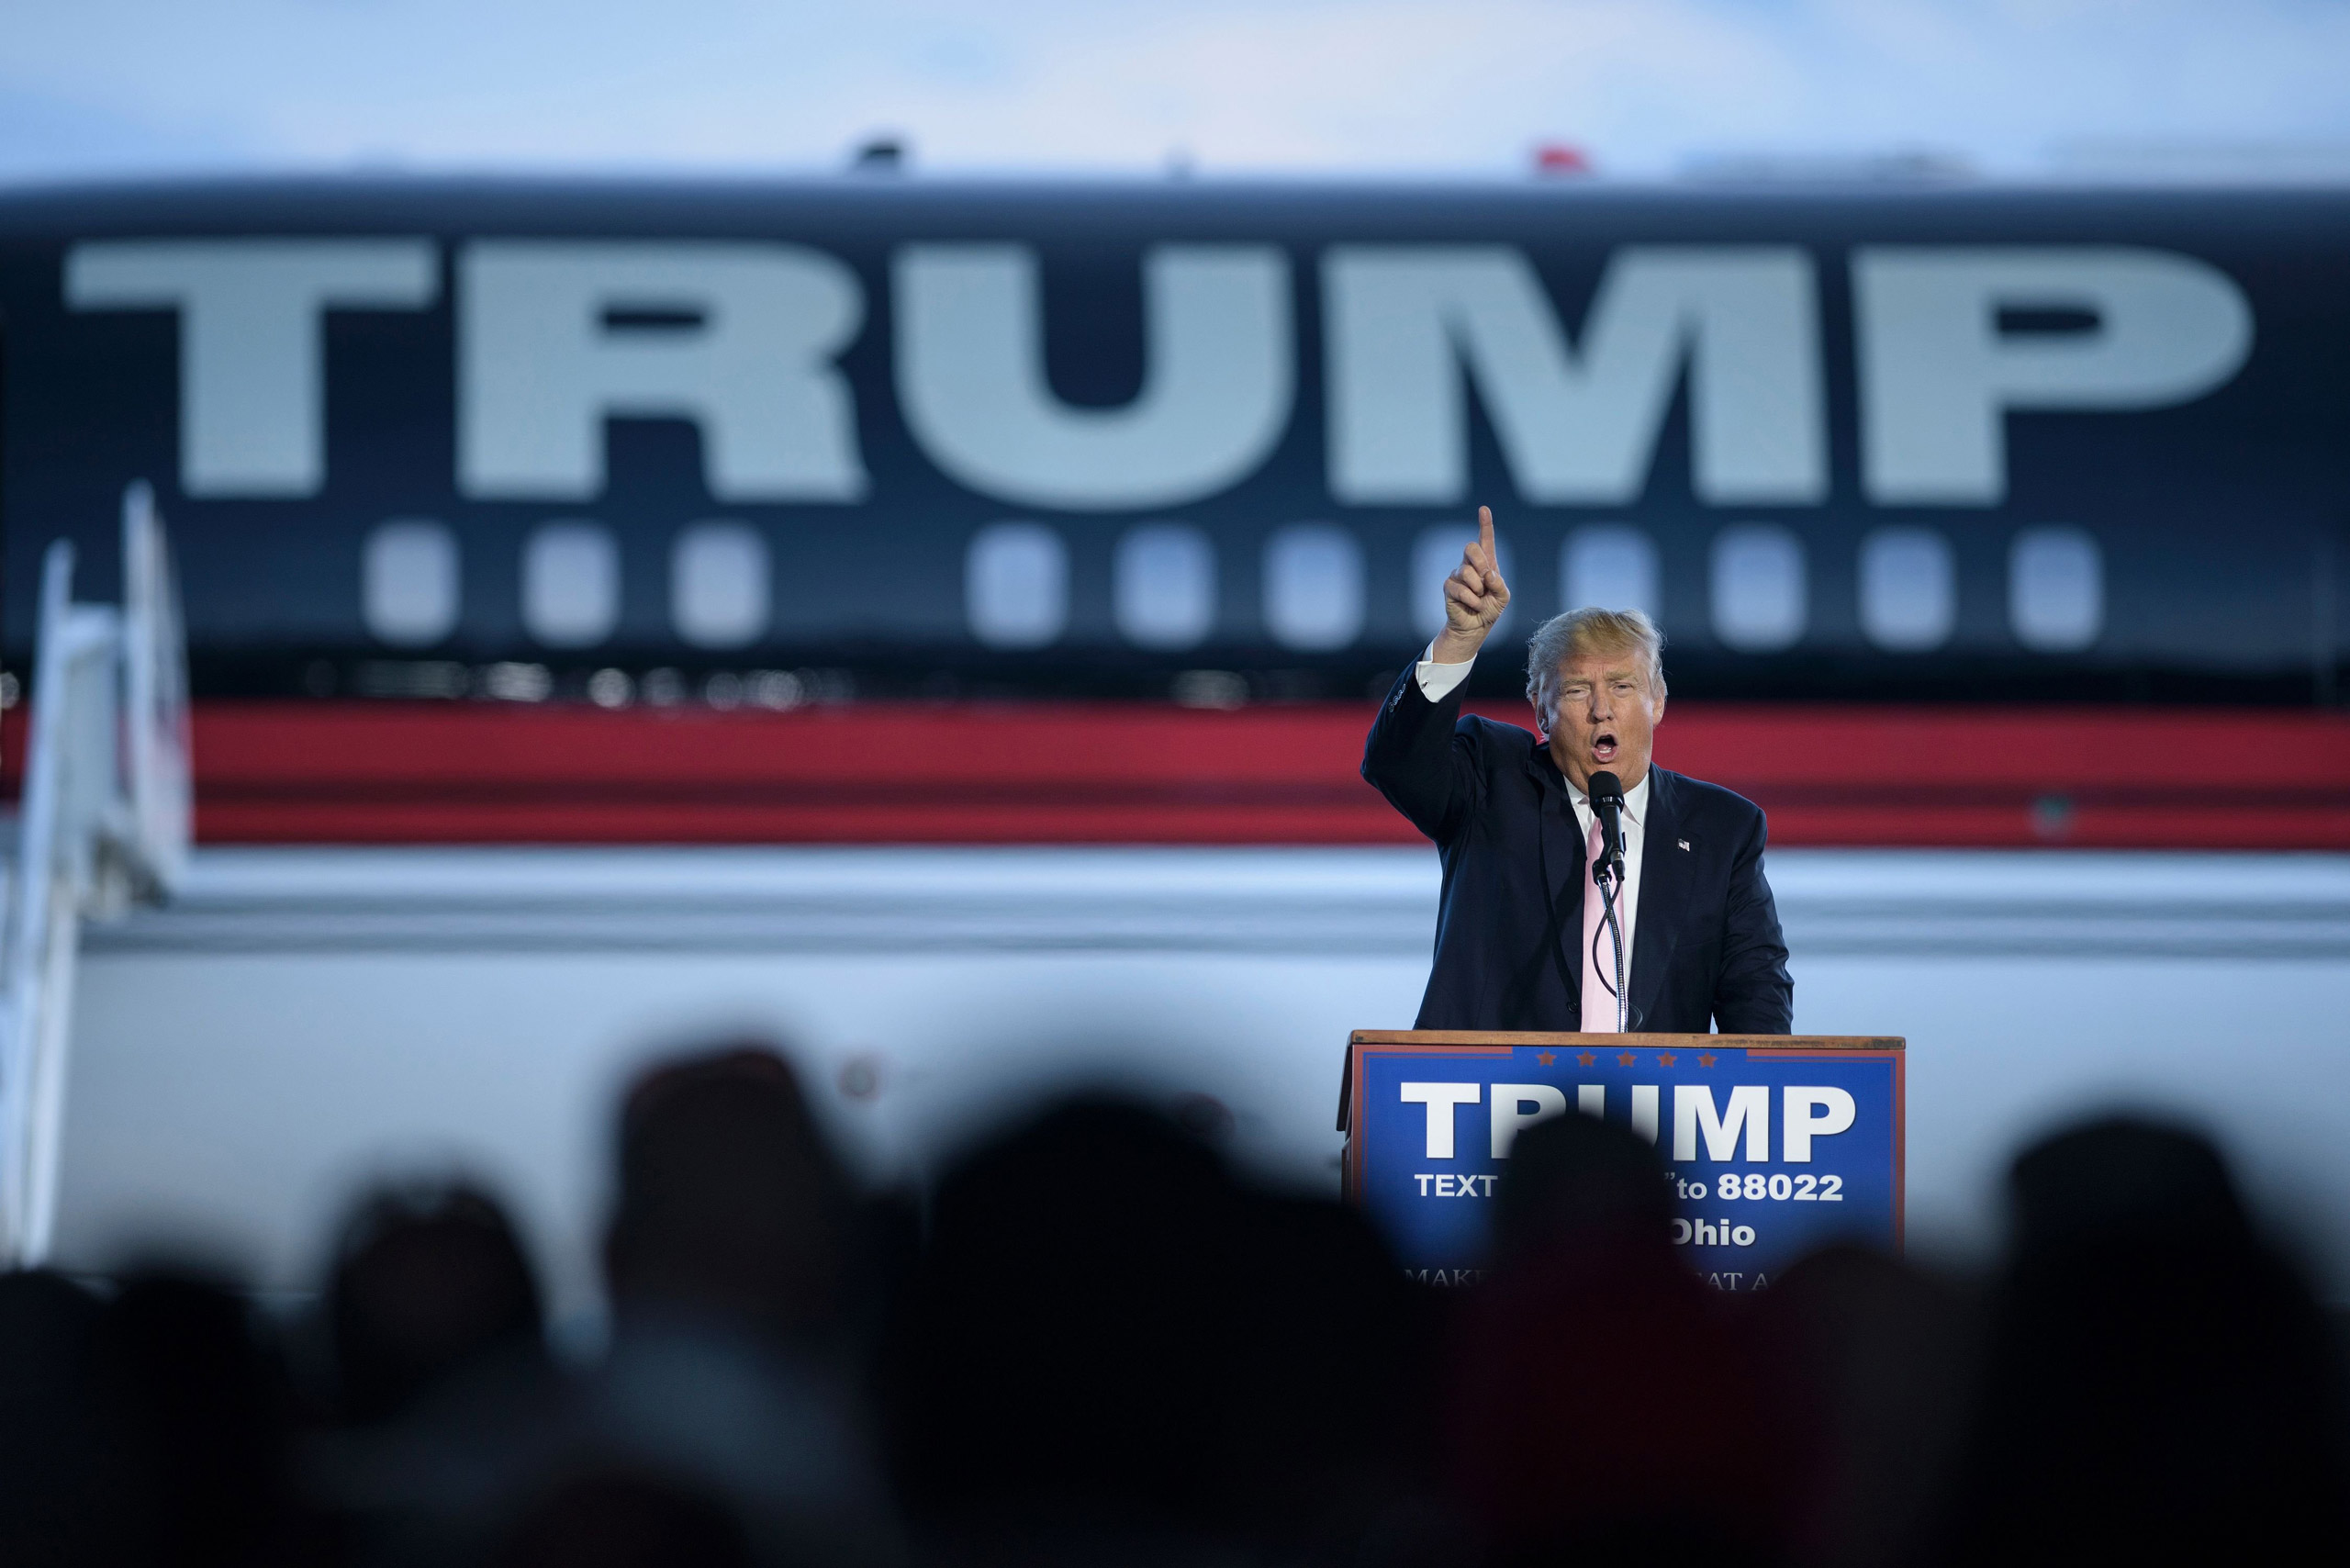 US presidential hopeful Donald Trump speaks during a rally March 14, 2016 in Vienna Center, Ohio.
                      The six remaining White House hopefuls made a frantic push for votes March 14, 2016 on the eve of make-or-break nominating contests, with Donald Trump's Republican rivals desperate to bar his path after a weekend of violence on the campaign trail. / AFP PHOTO / Brendan SmialowskiBRENDAN SMIALOWSKI/AFP/Getty Images (Brendan Smialowski—AFP/Getty Images)